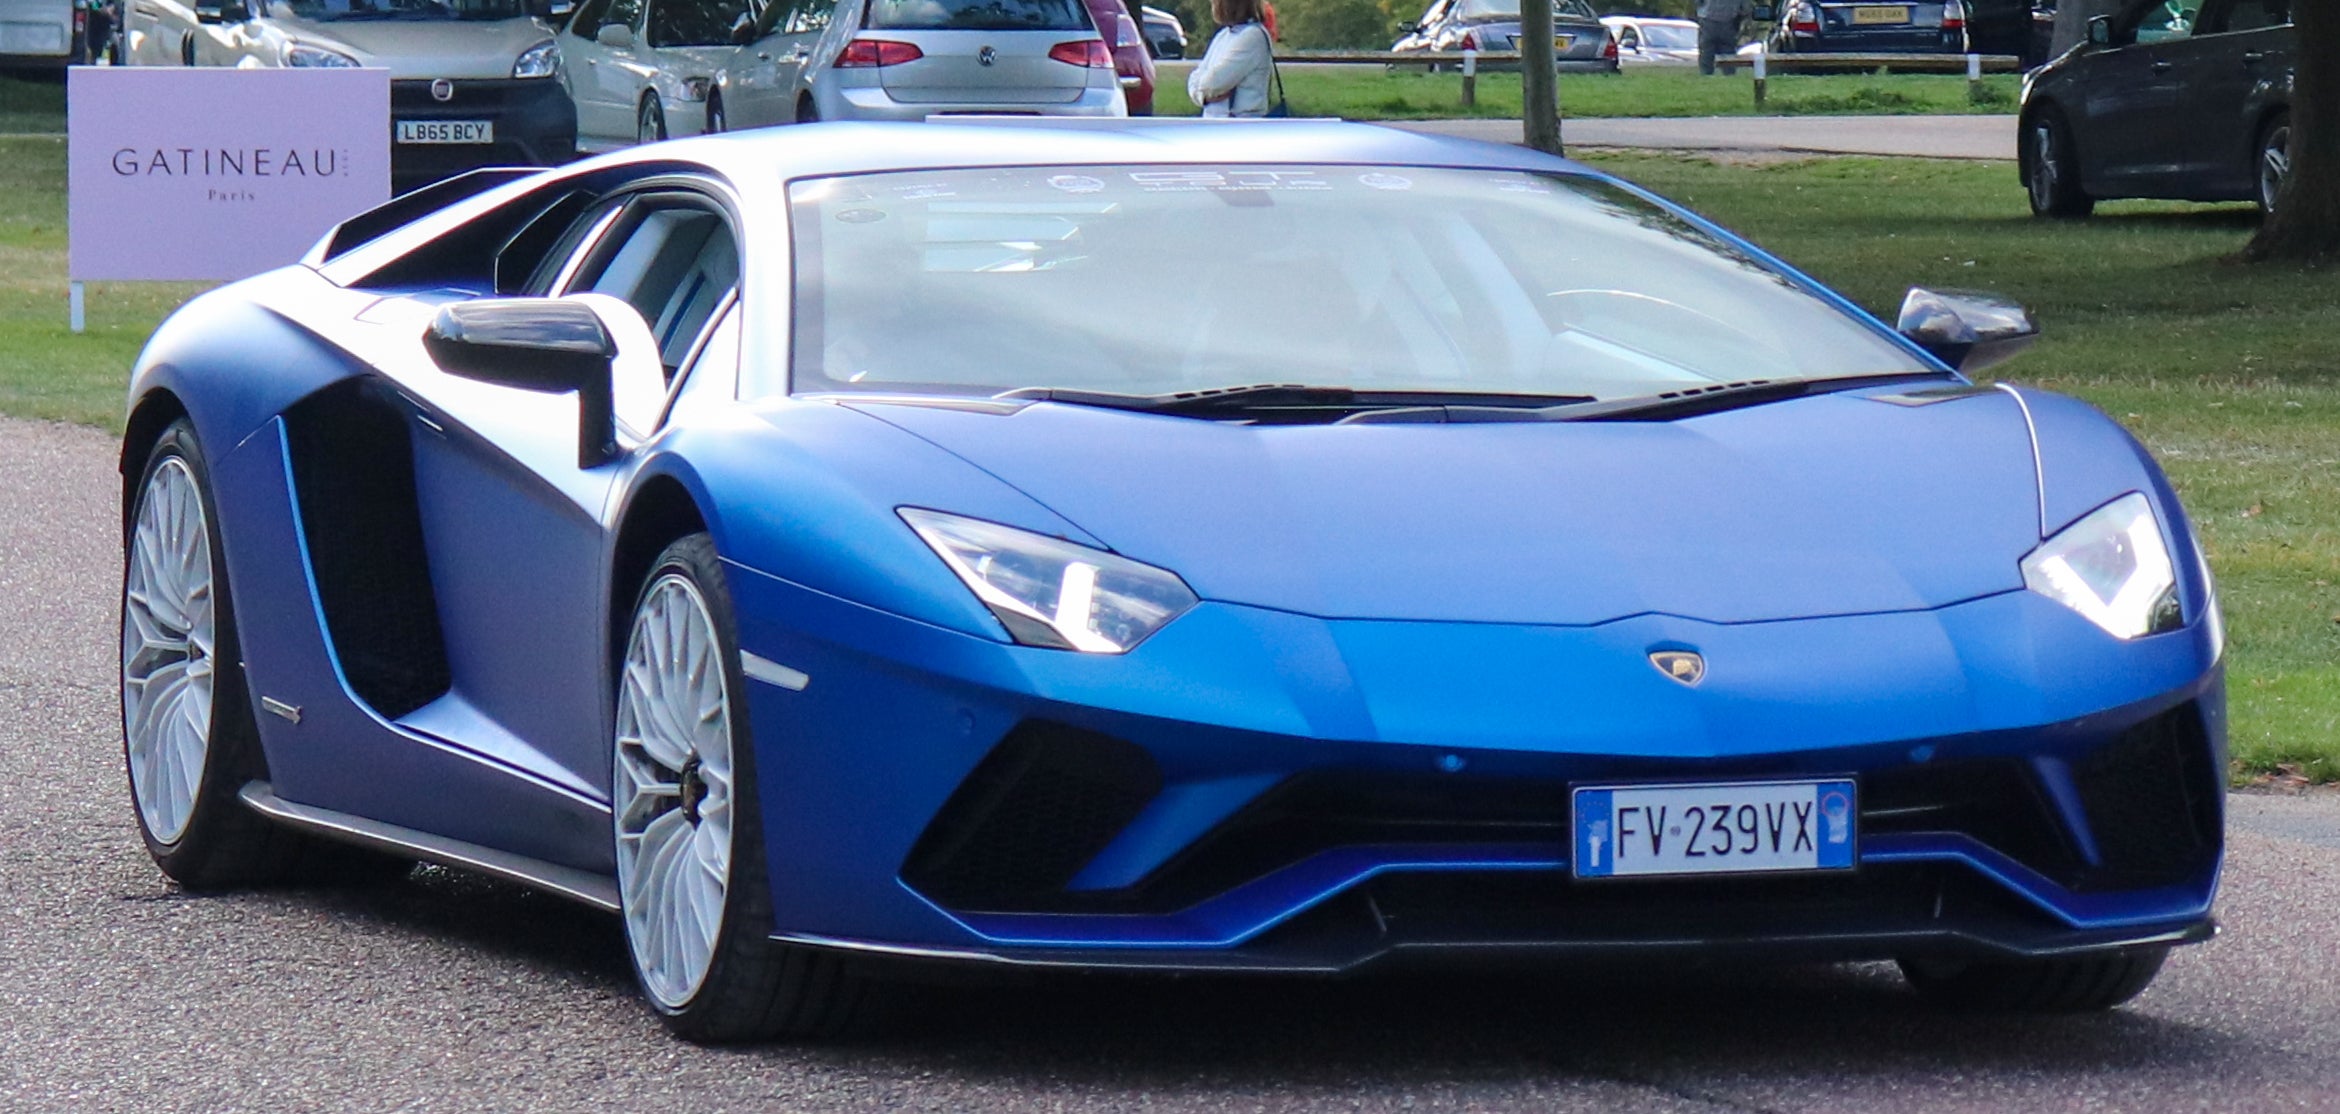 A 2018 Lamborghini Aventador was one of the three cars seized by authorities.